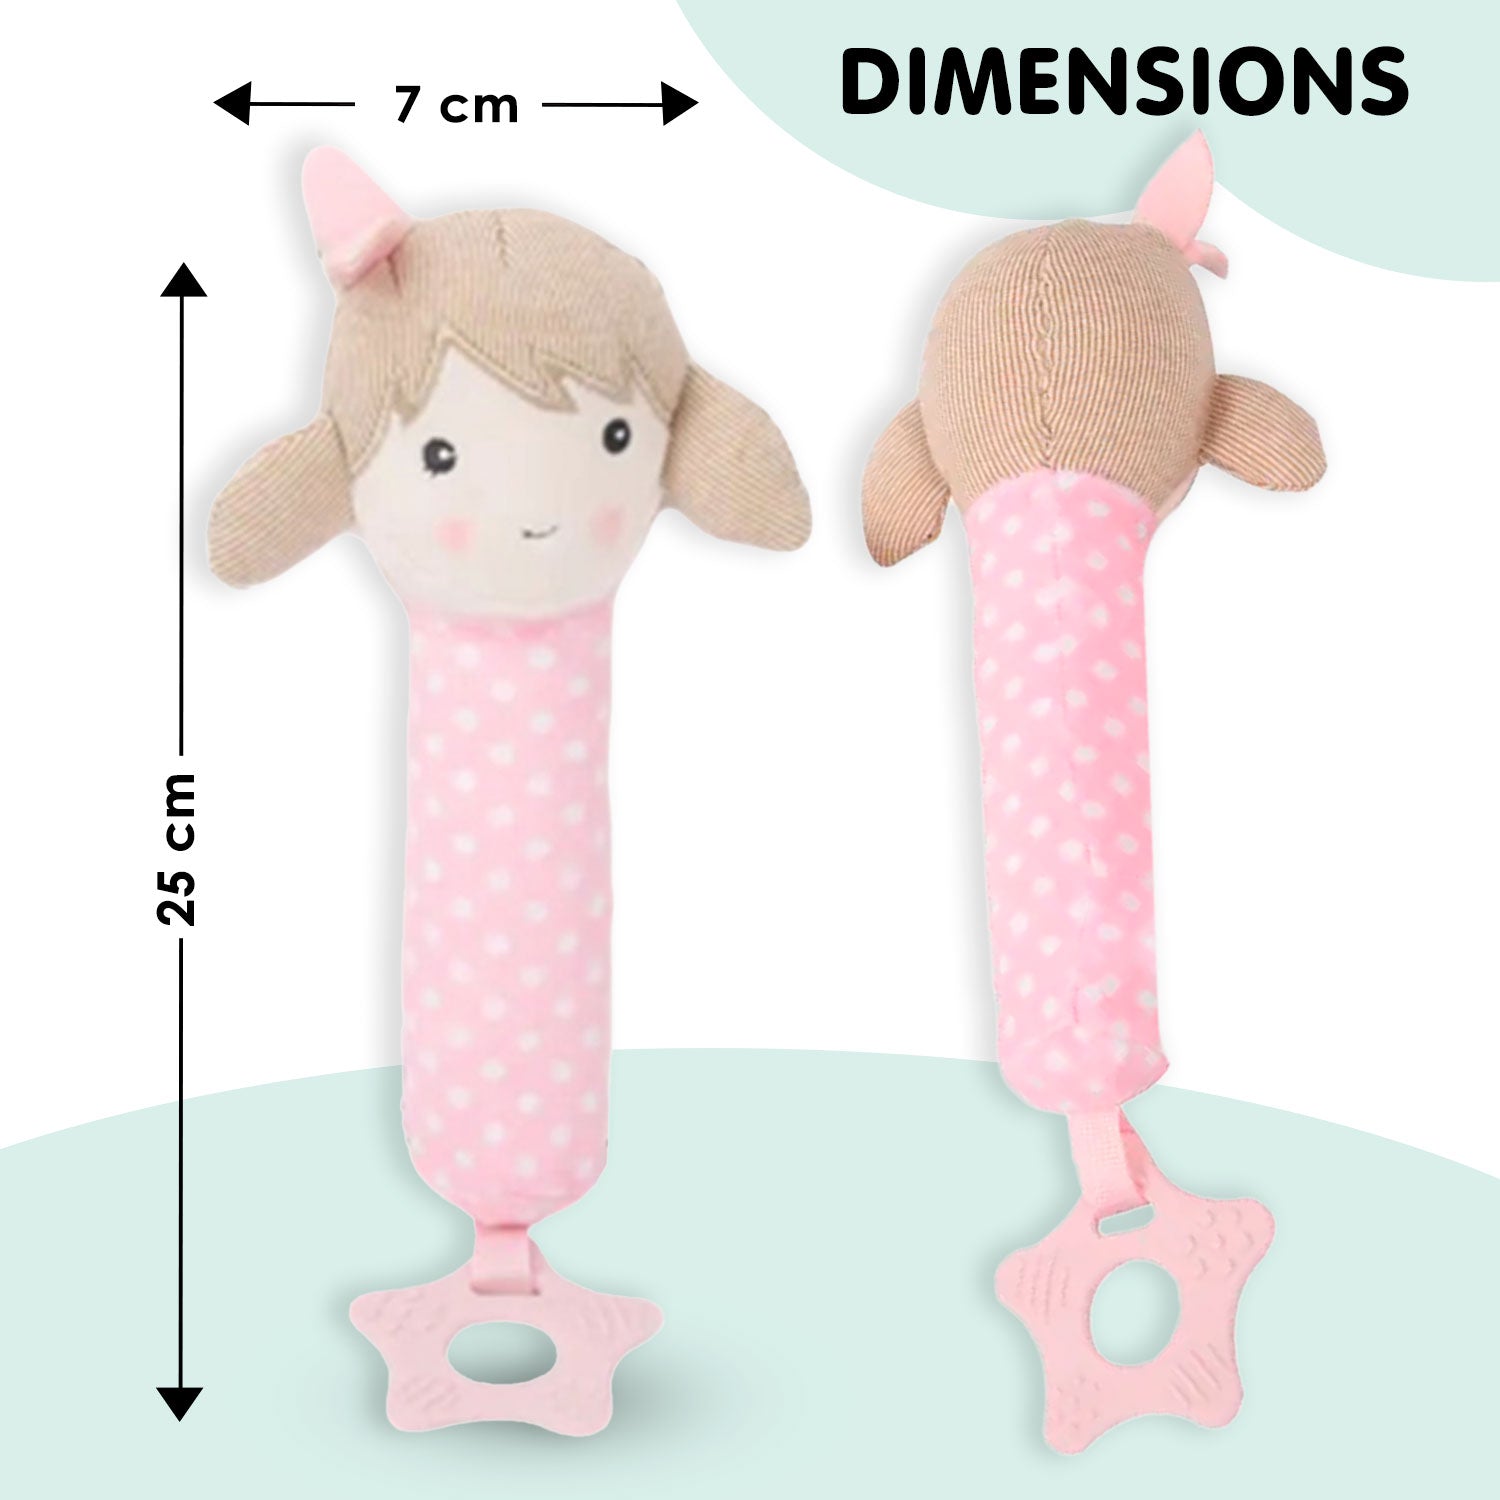 Baby Moo Pigtail Doll Squeaker With Teether Handheld Rattle Toy - Pink